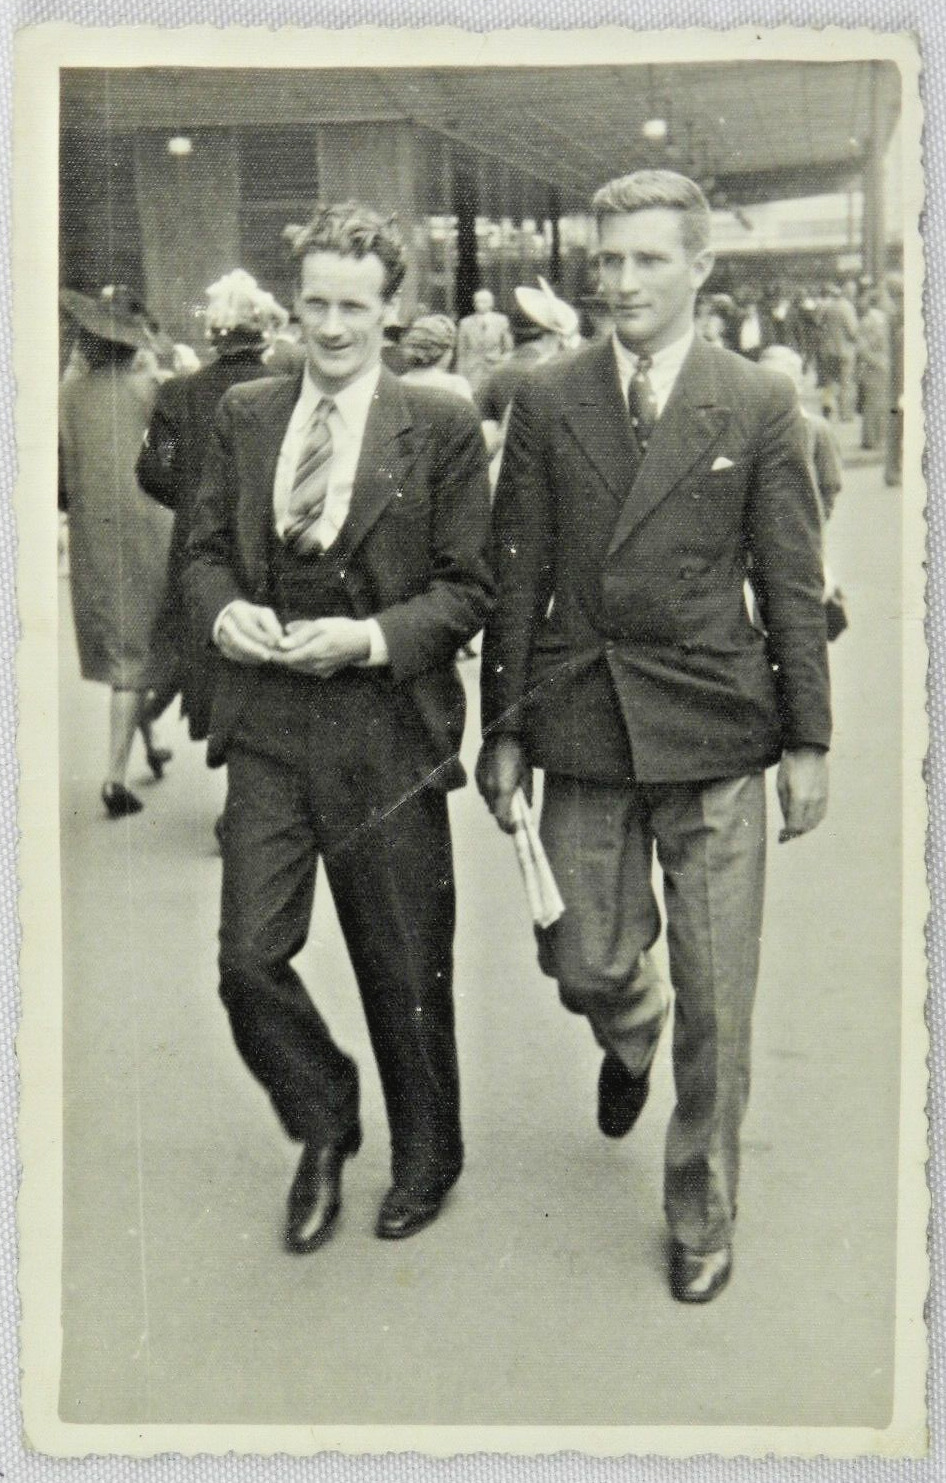 1920's Two Young Men Cleanly Pressed Suit & Tie Walk Street - Vintage Photograph